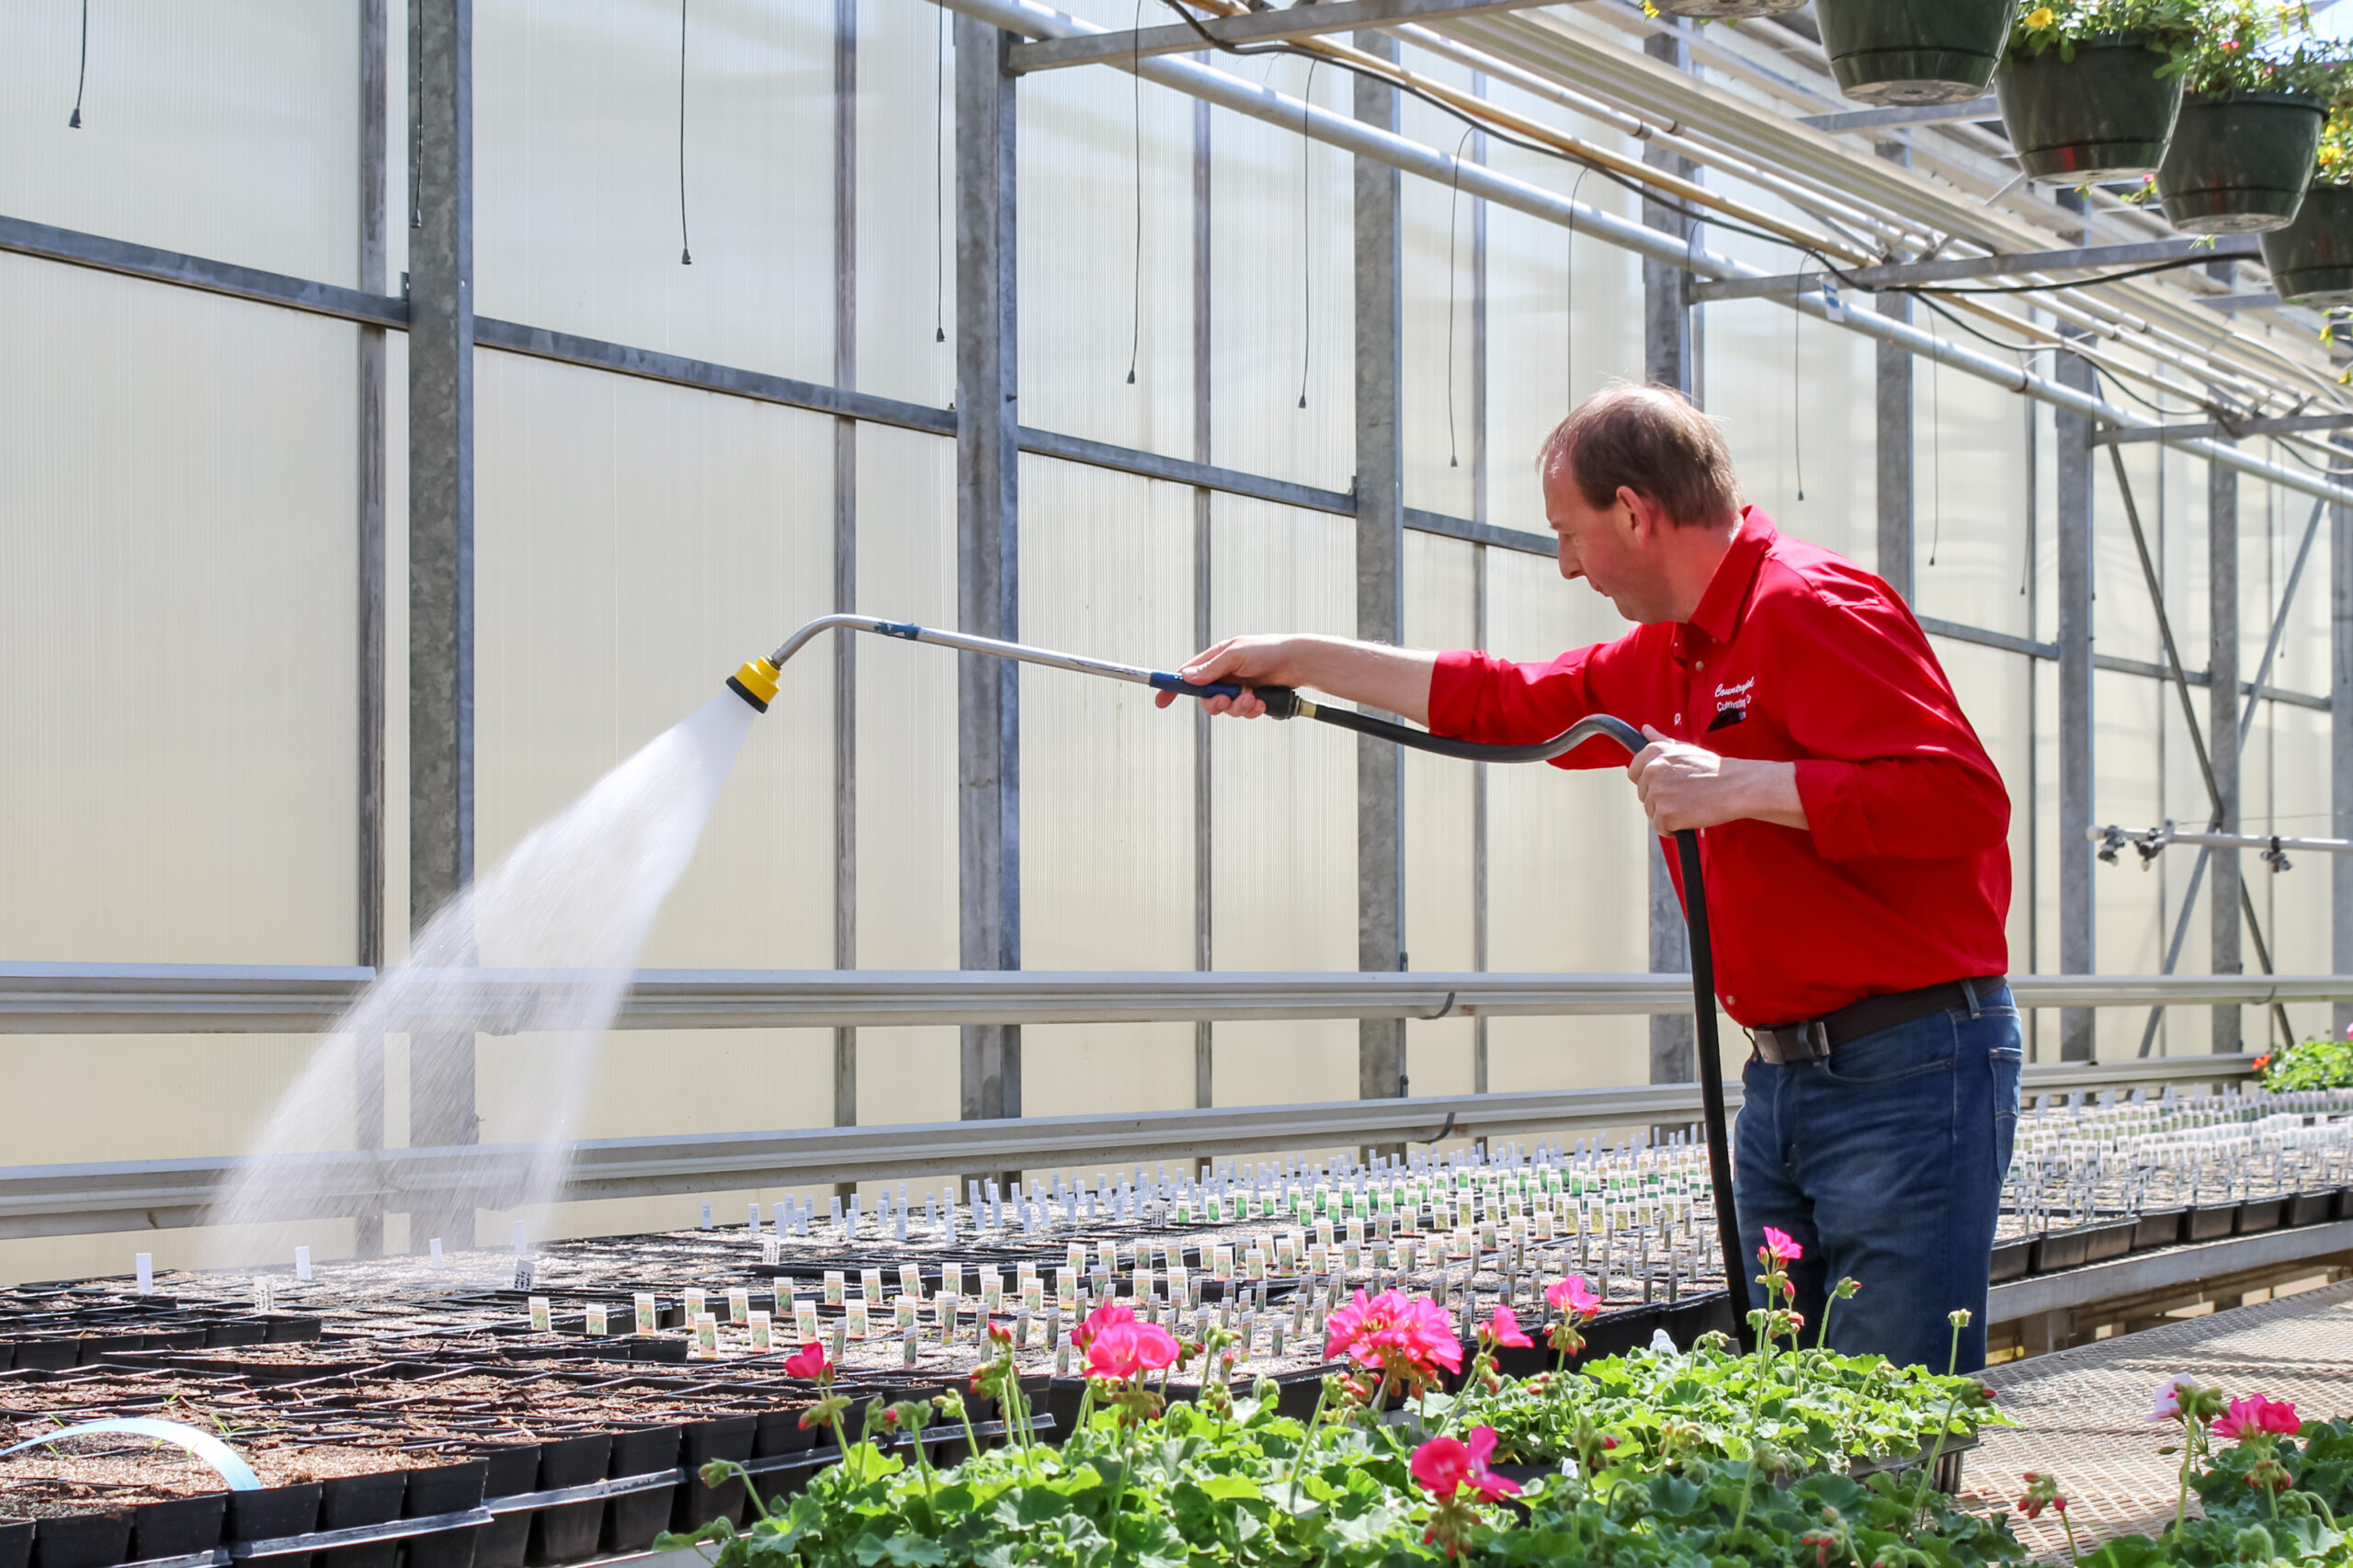 A man holding a hose and watering a row of growing plants in the greenhouse behind the store.